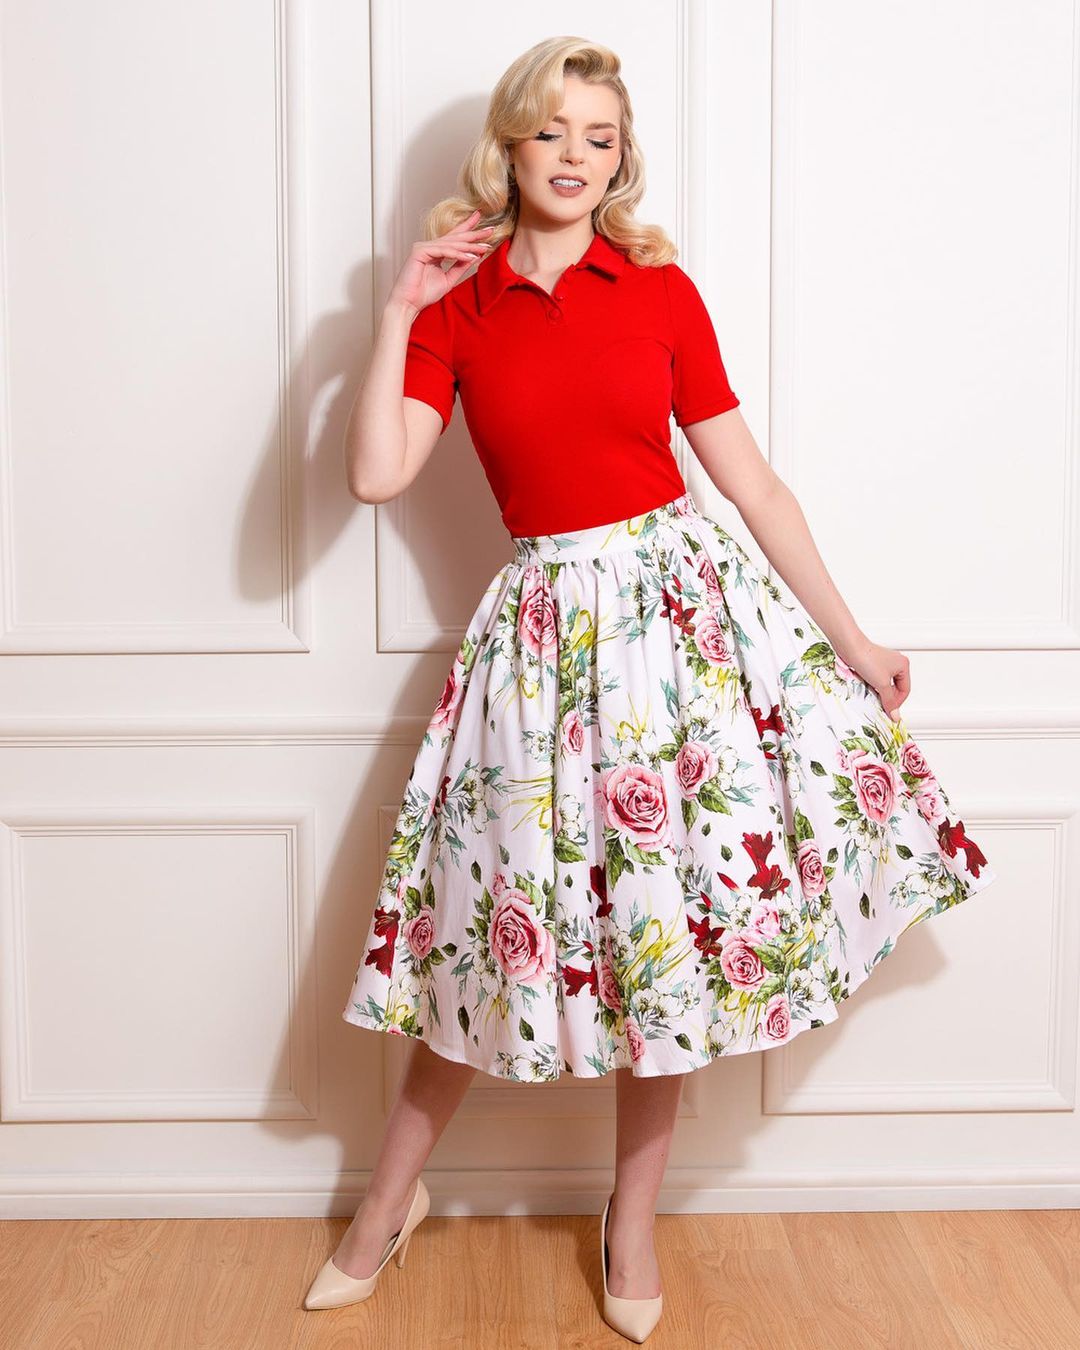 30 Types of Skirts to Choose the Right One for Your Figure